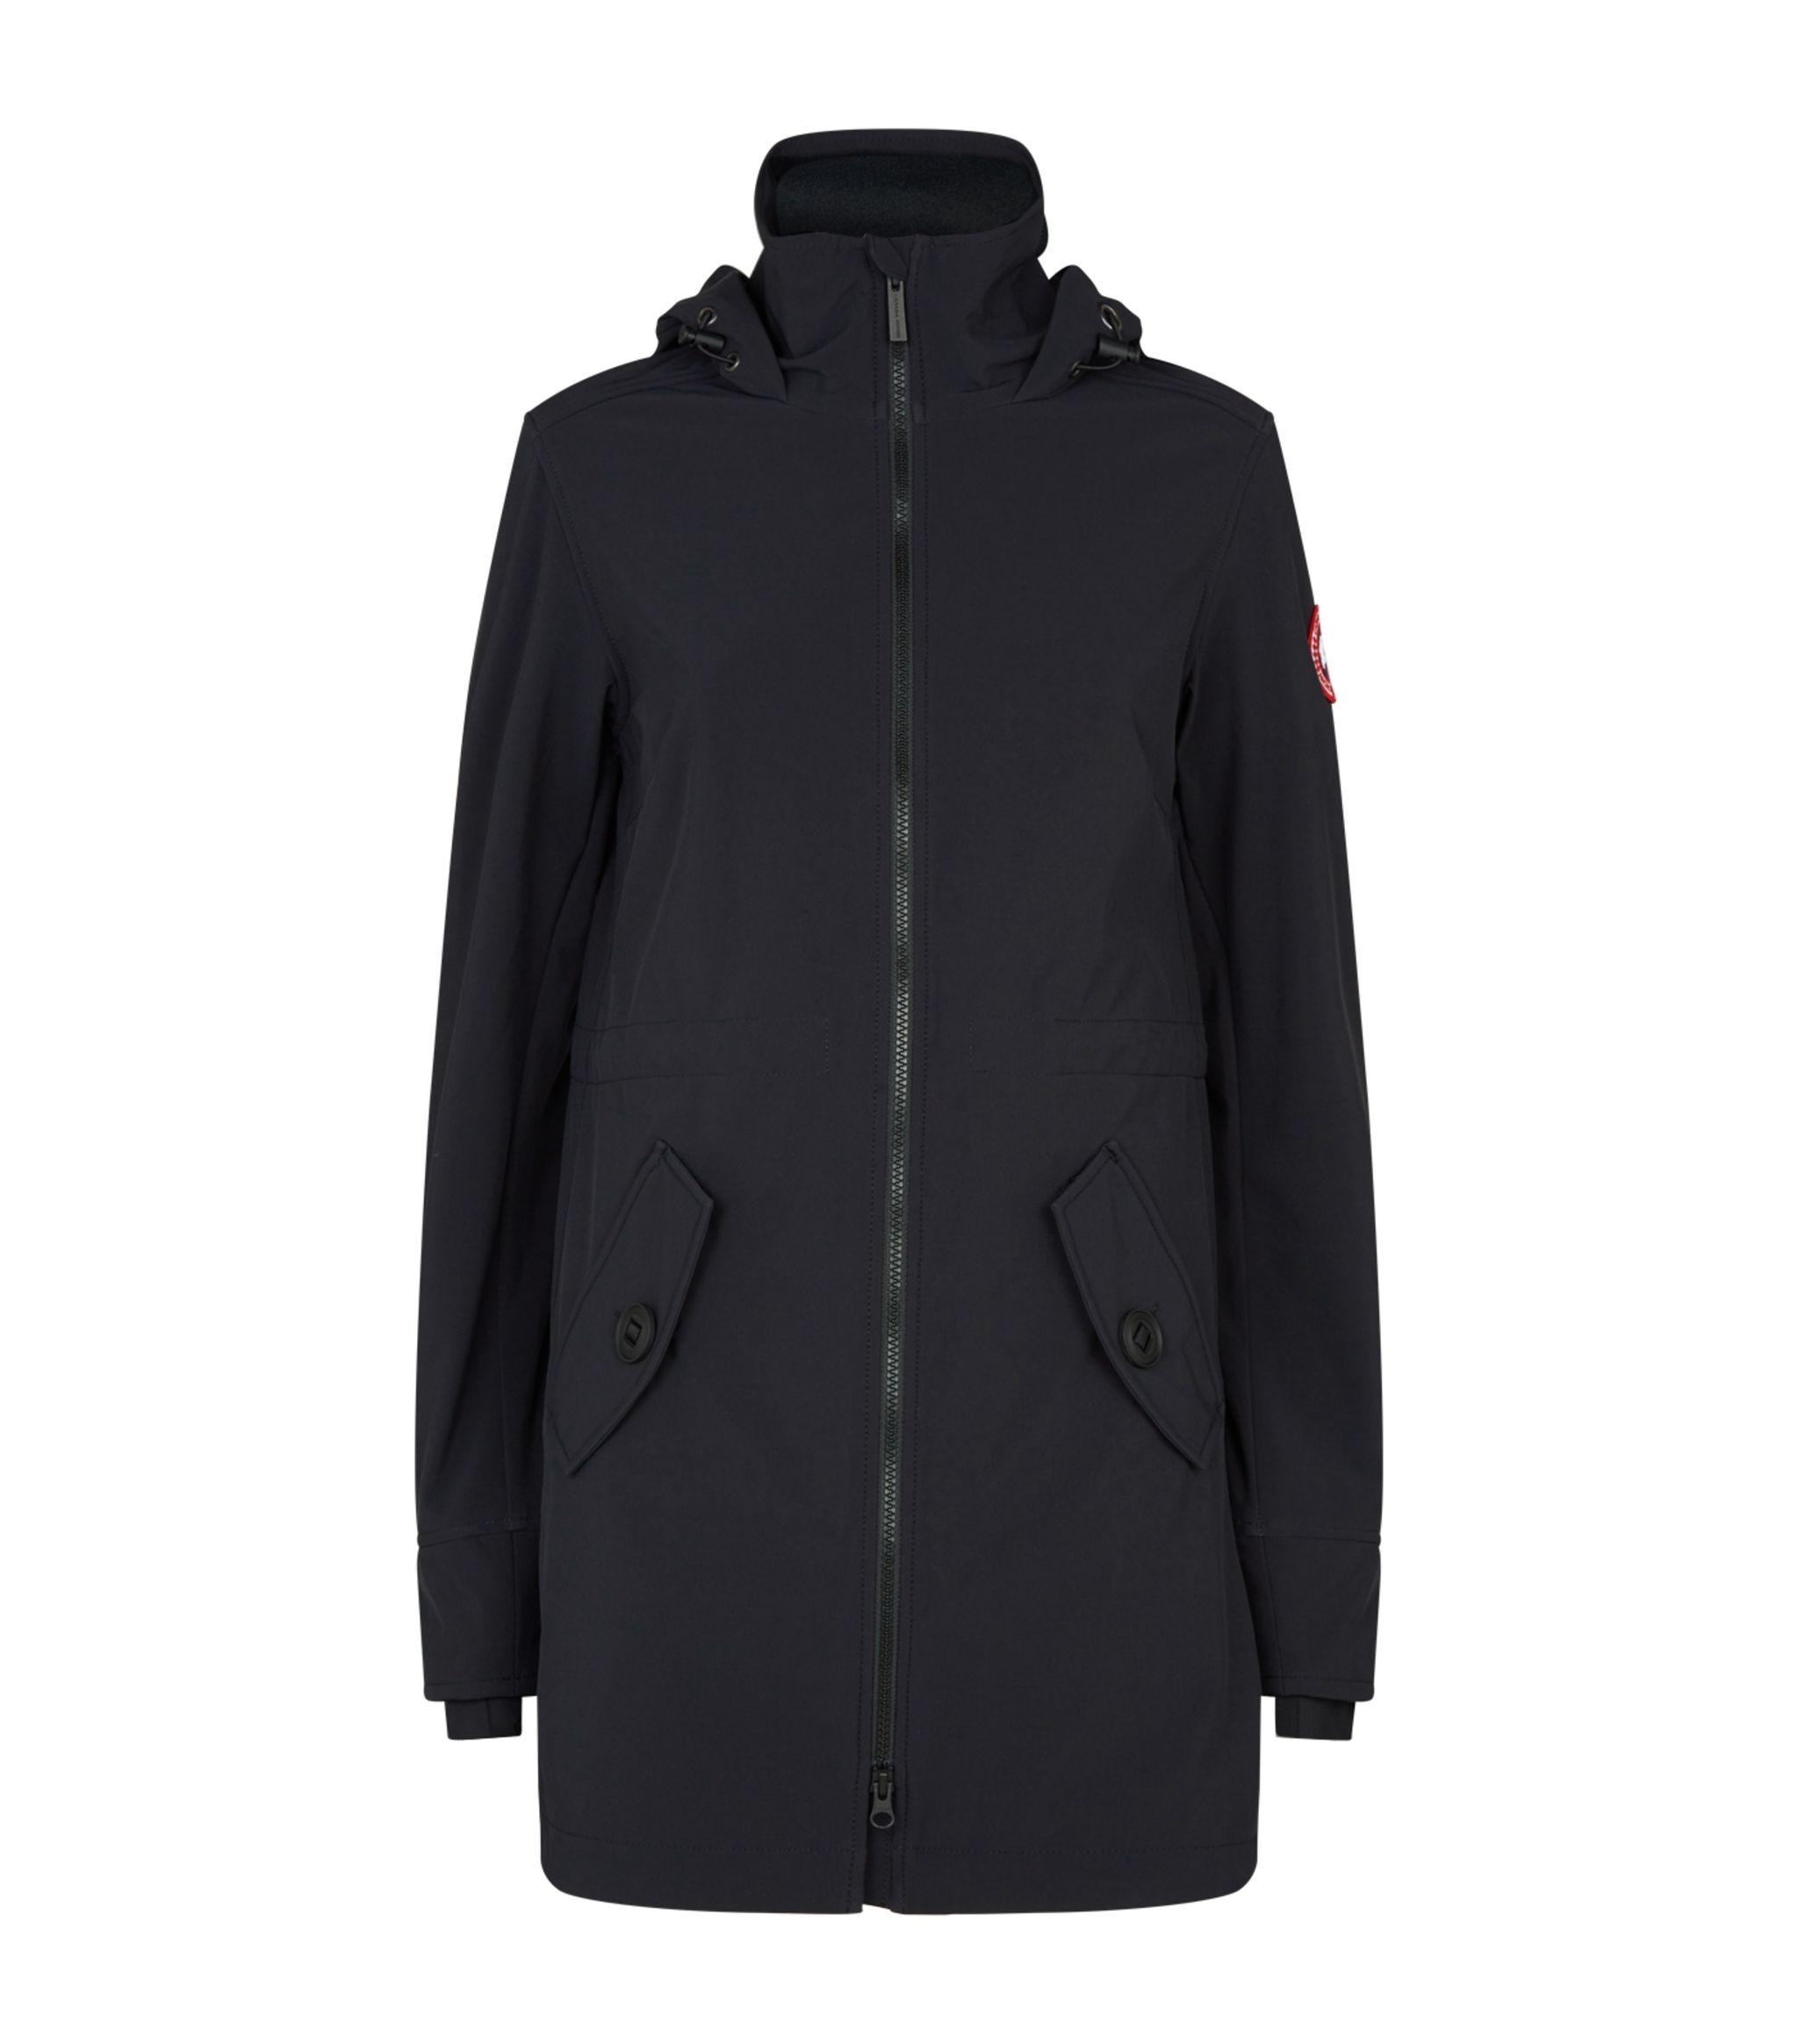 Canada Goose Goose Hooded Avery Jacket in Black - Lyst